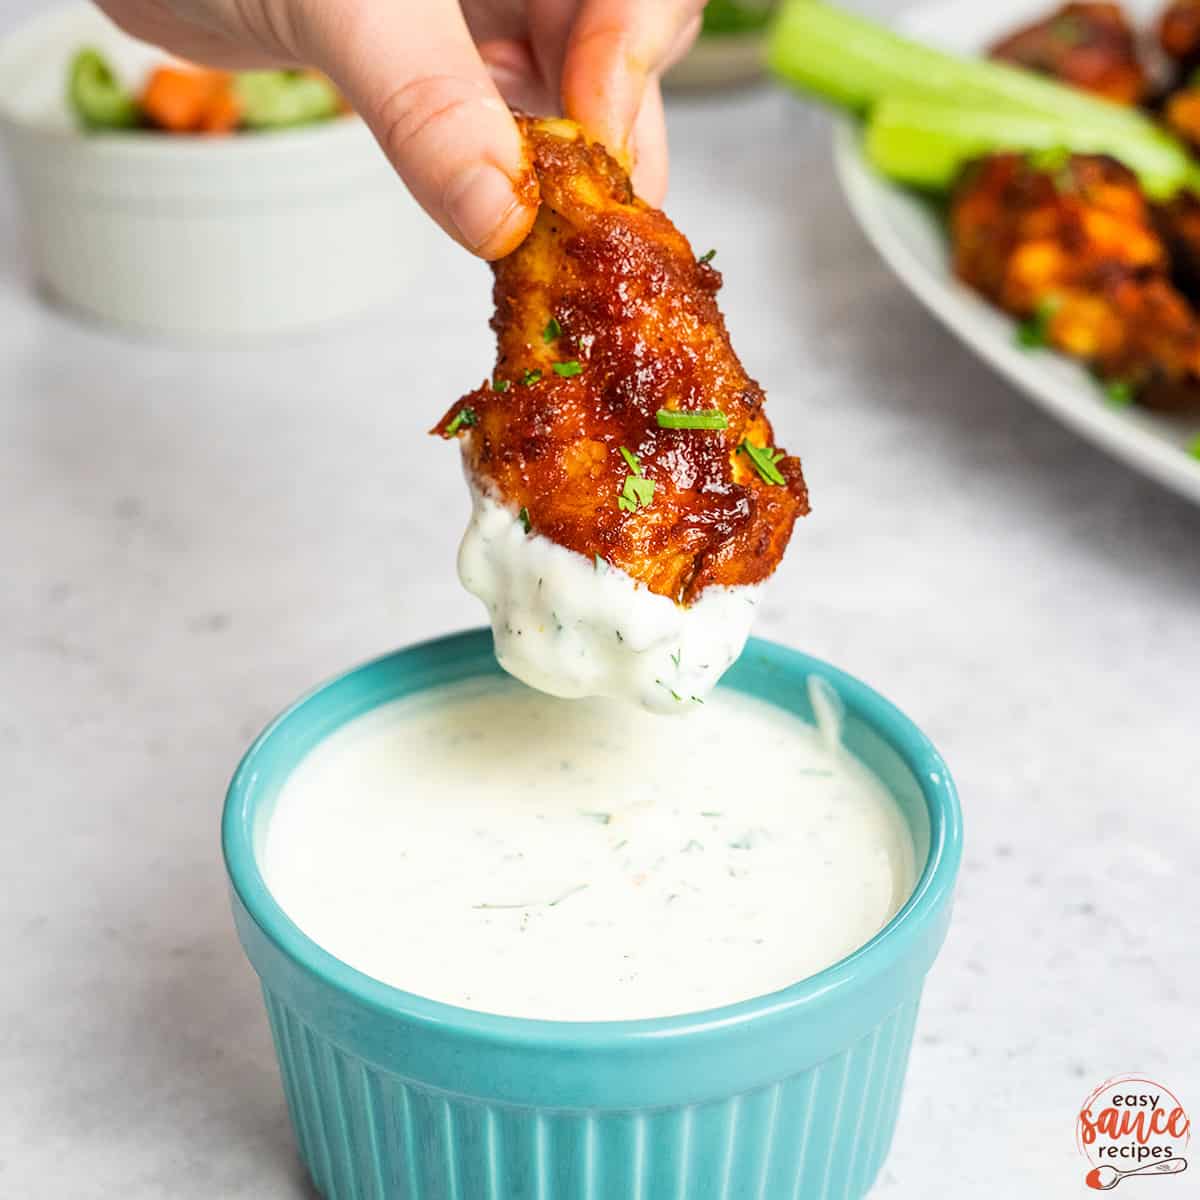 ranch in a blue dish with a wing over top